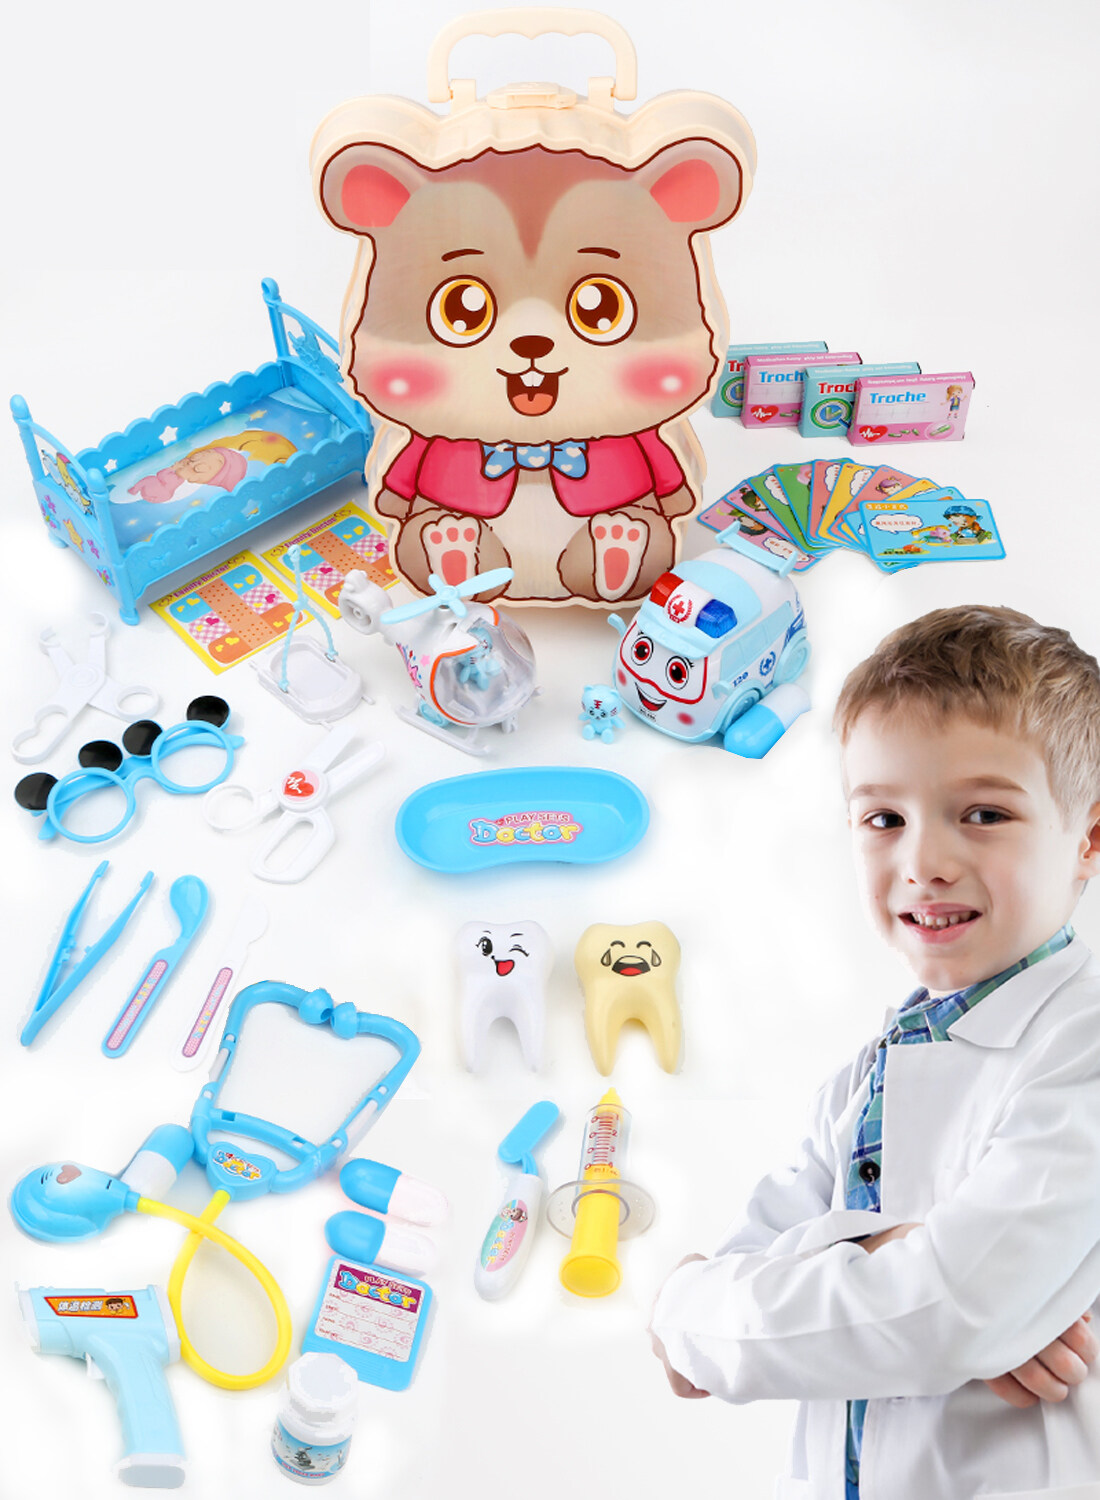 Doctor Kit for Kids, 45 Pcs Pretend Playset kit for Toddlers 3-5,Dentist Kit for Kids, Toys for Boys and Girls Fun Role Playing Game